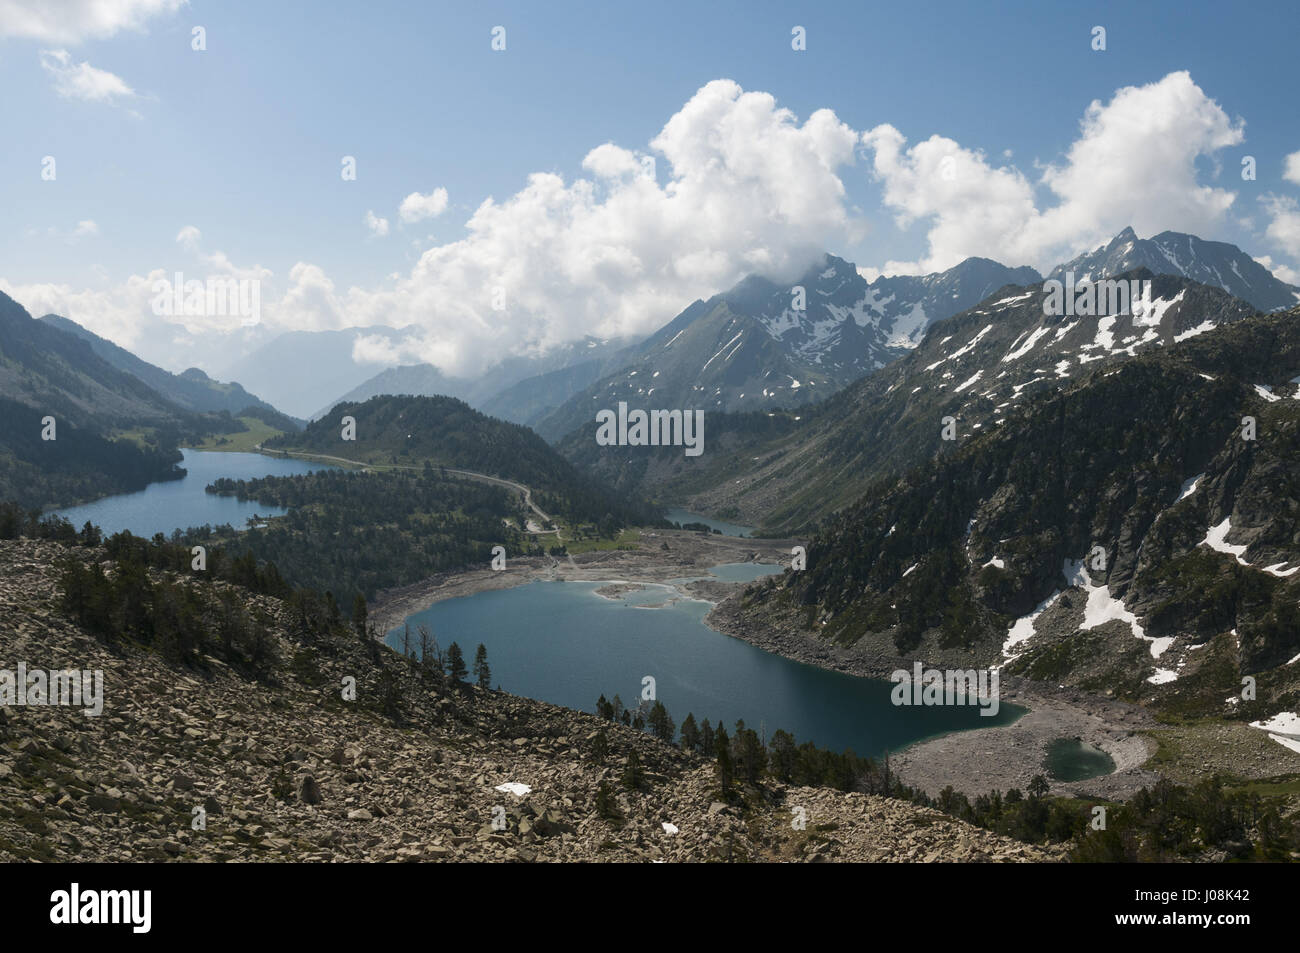 France, Pyrenees, Neouvielle Natural Reserve, Lakes Aumar and Aubert landscape Stock Photo